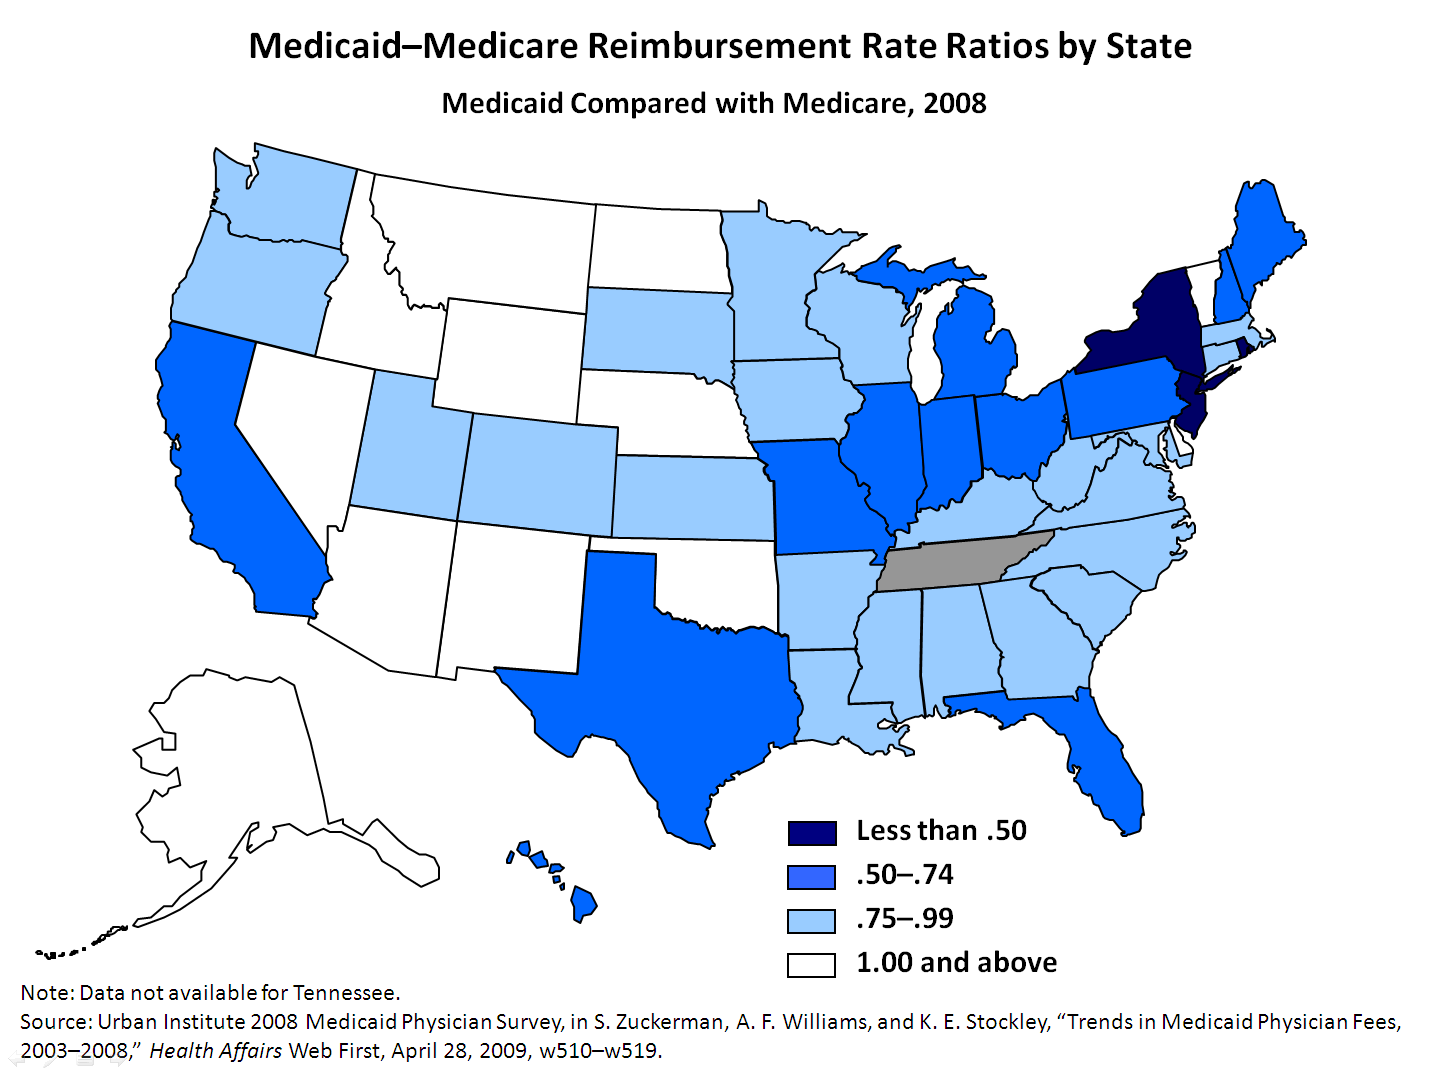 MedicaidMedicare Reimbursement Rate Ratios by State Commonwealth Fund